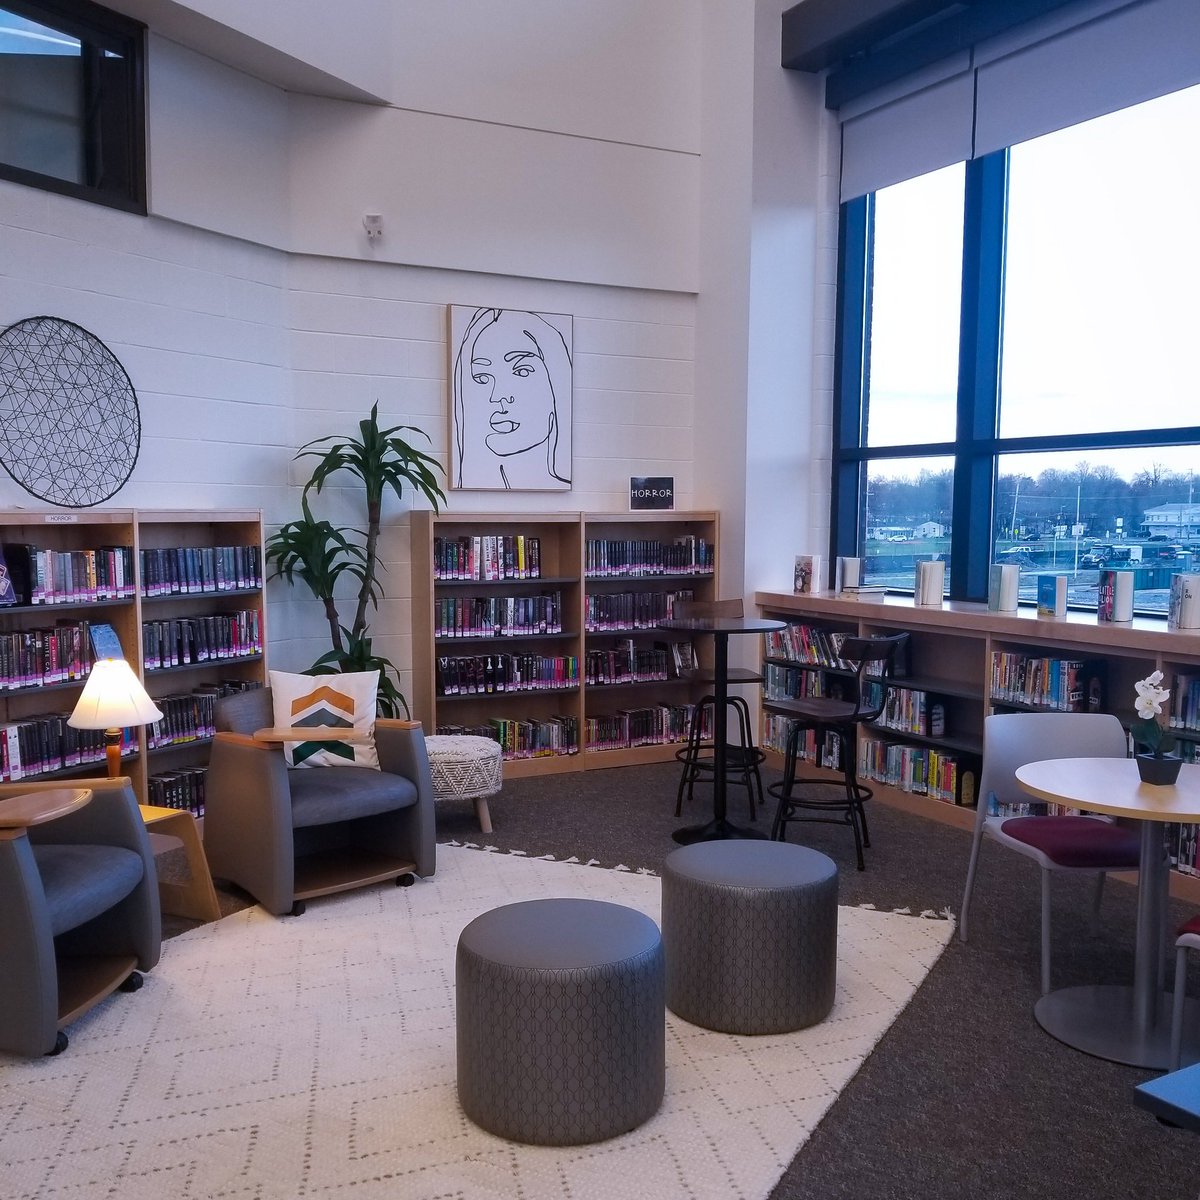 CURRENT FAVORITE SPOT in the LIBRARY. 😍😍😍
🏗️High ceilings...✔️
☀️ Natural light streaming in...✔️
📚Cozy corner for reading & relaxing...✔️
What are you excited about utilizing in our new space?? #ourhcpslibrary #havredegrace #hcpsproud #schoollibrary #library